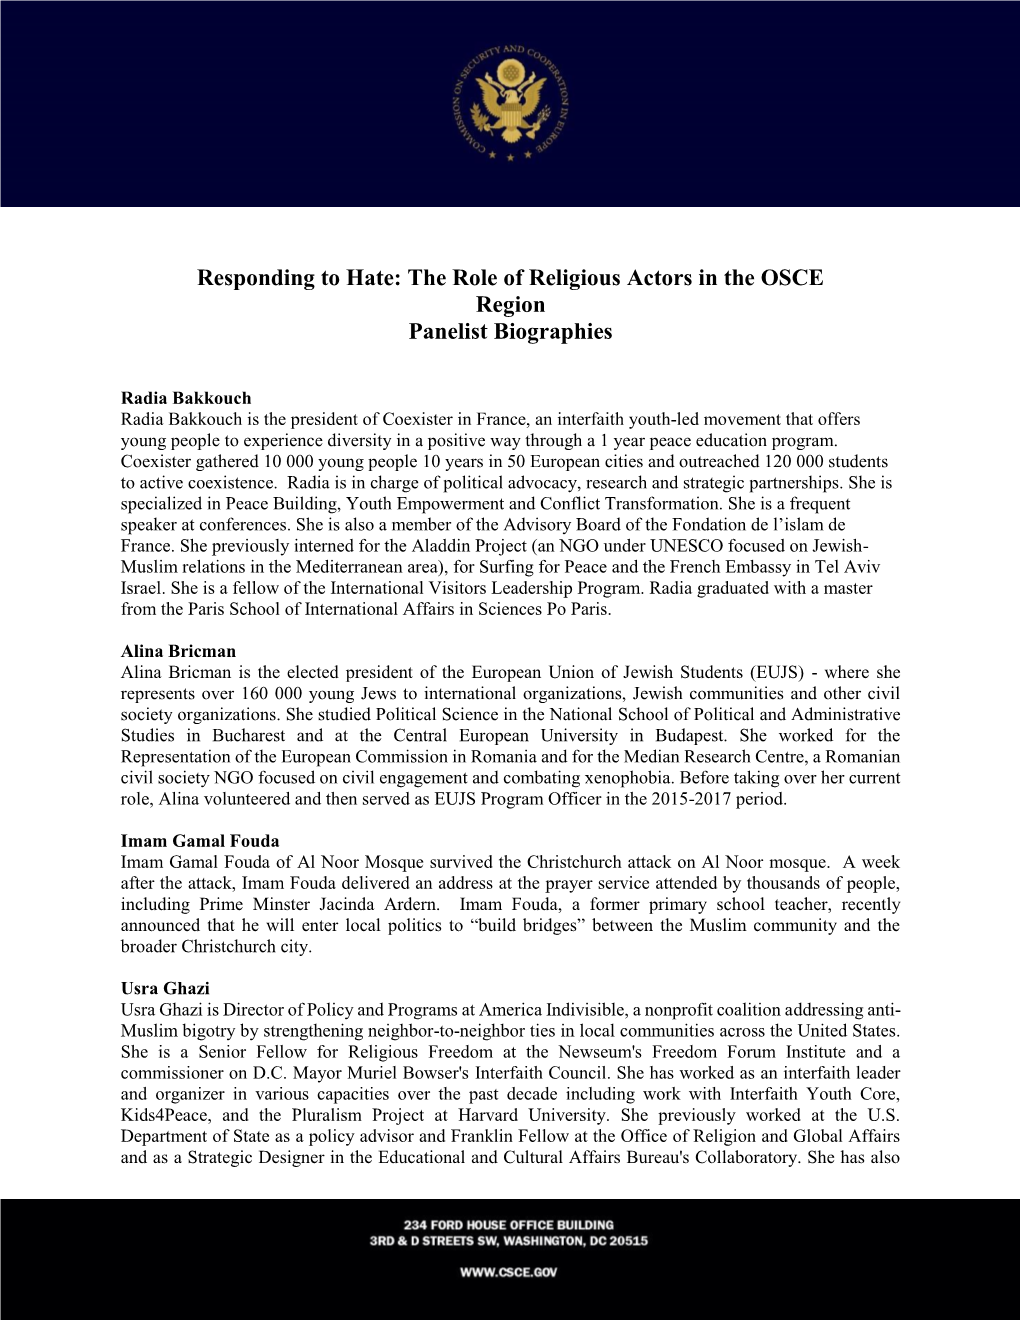 Responding to Hate: the Role of Religious Actors in the OSCE Region Panelist Biographies